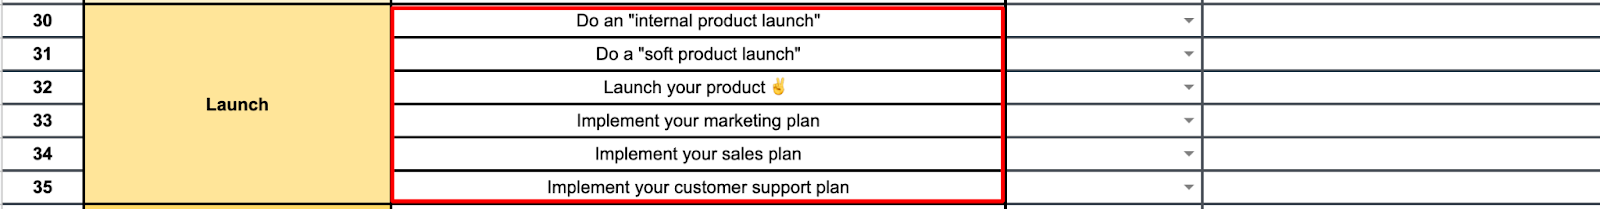 Product launch checklist template 